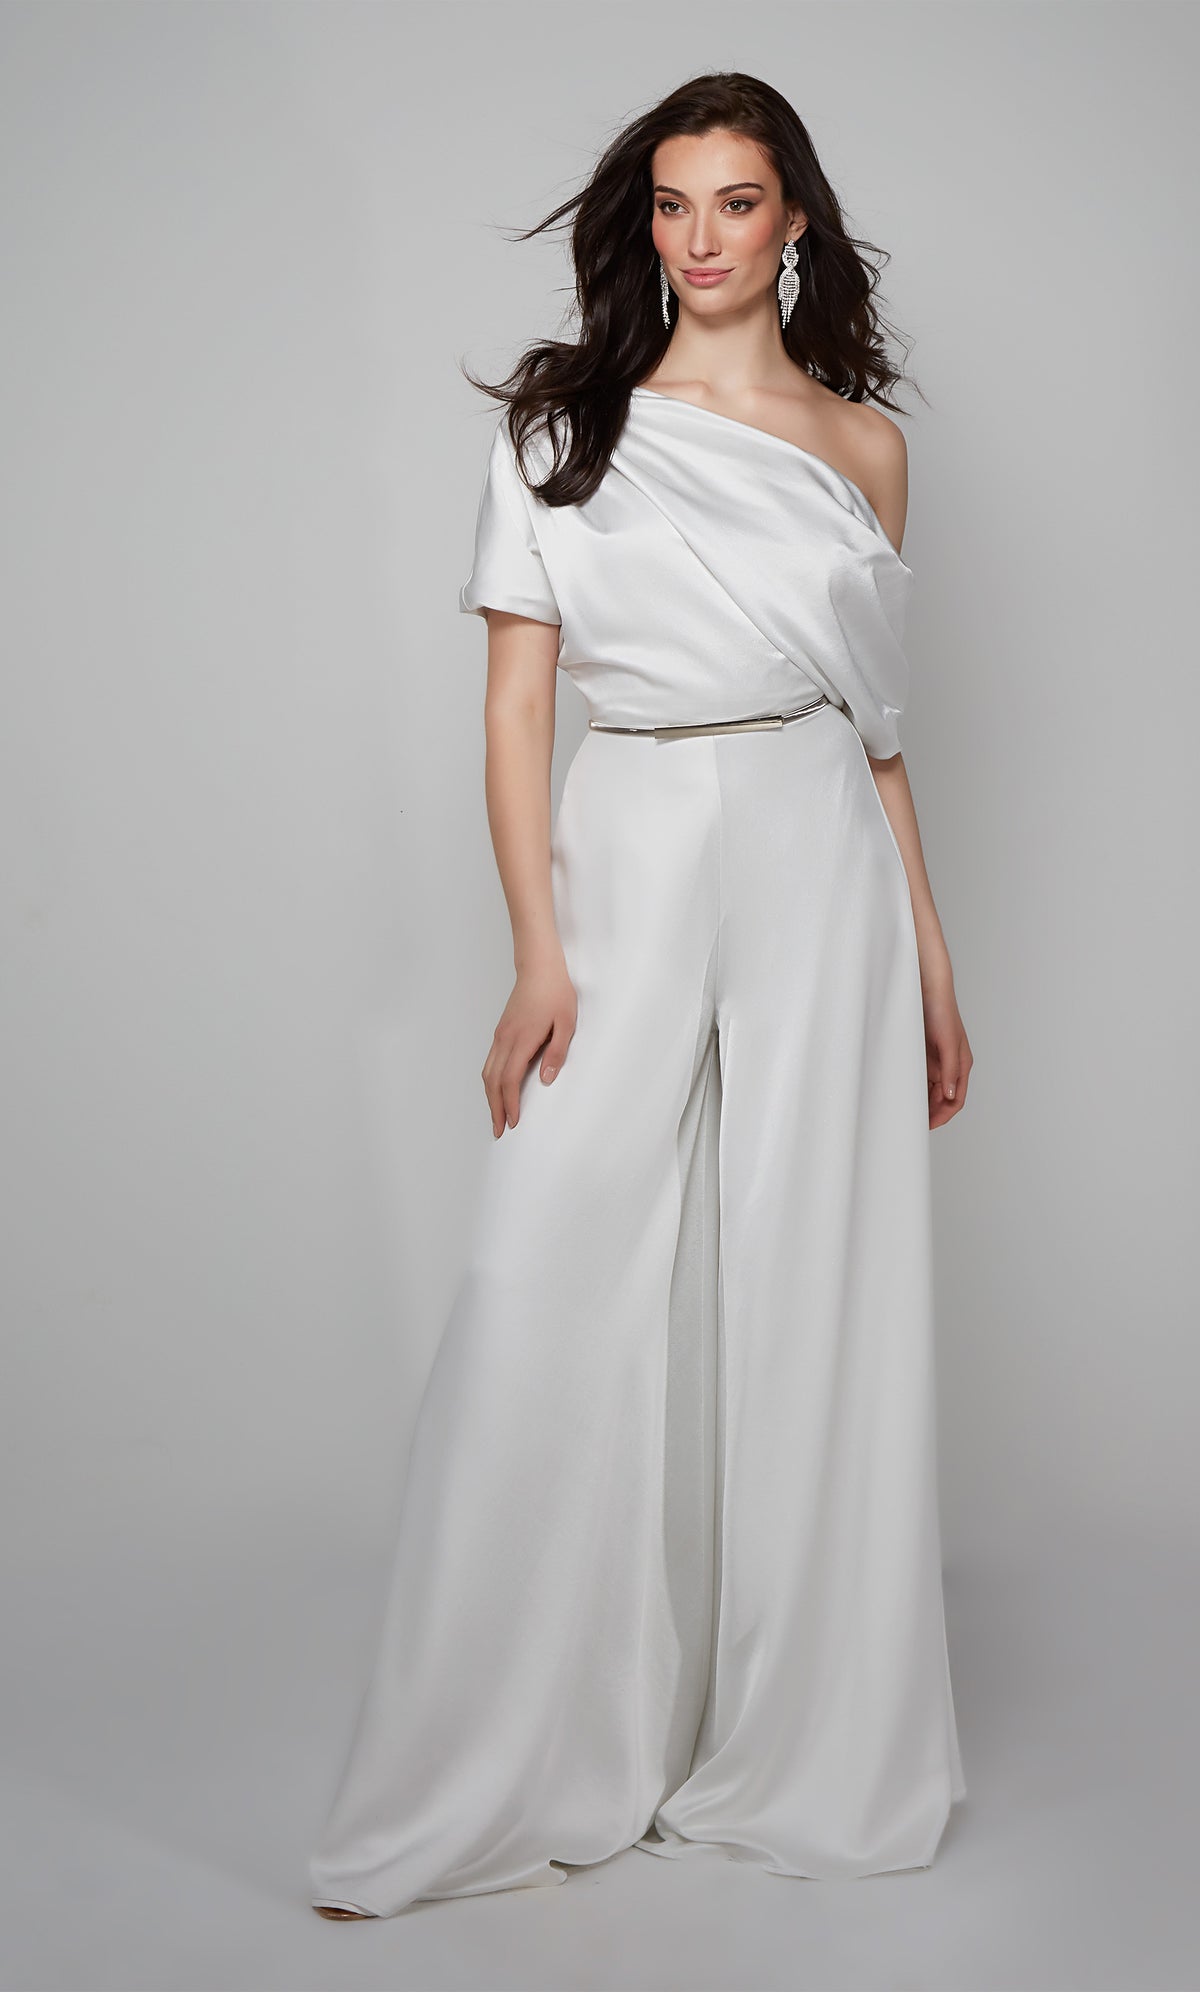 Ivory engagement jumpsuit with a draped one shoulder bodice shown with silver belt. Belt not included with purchase.